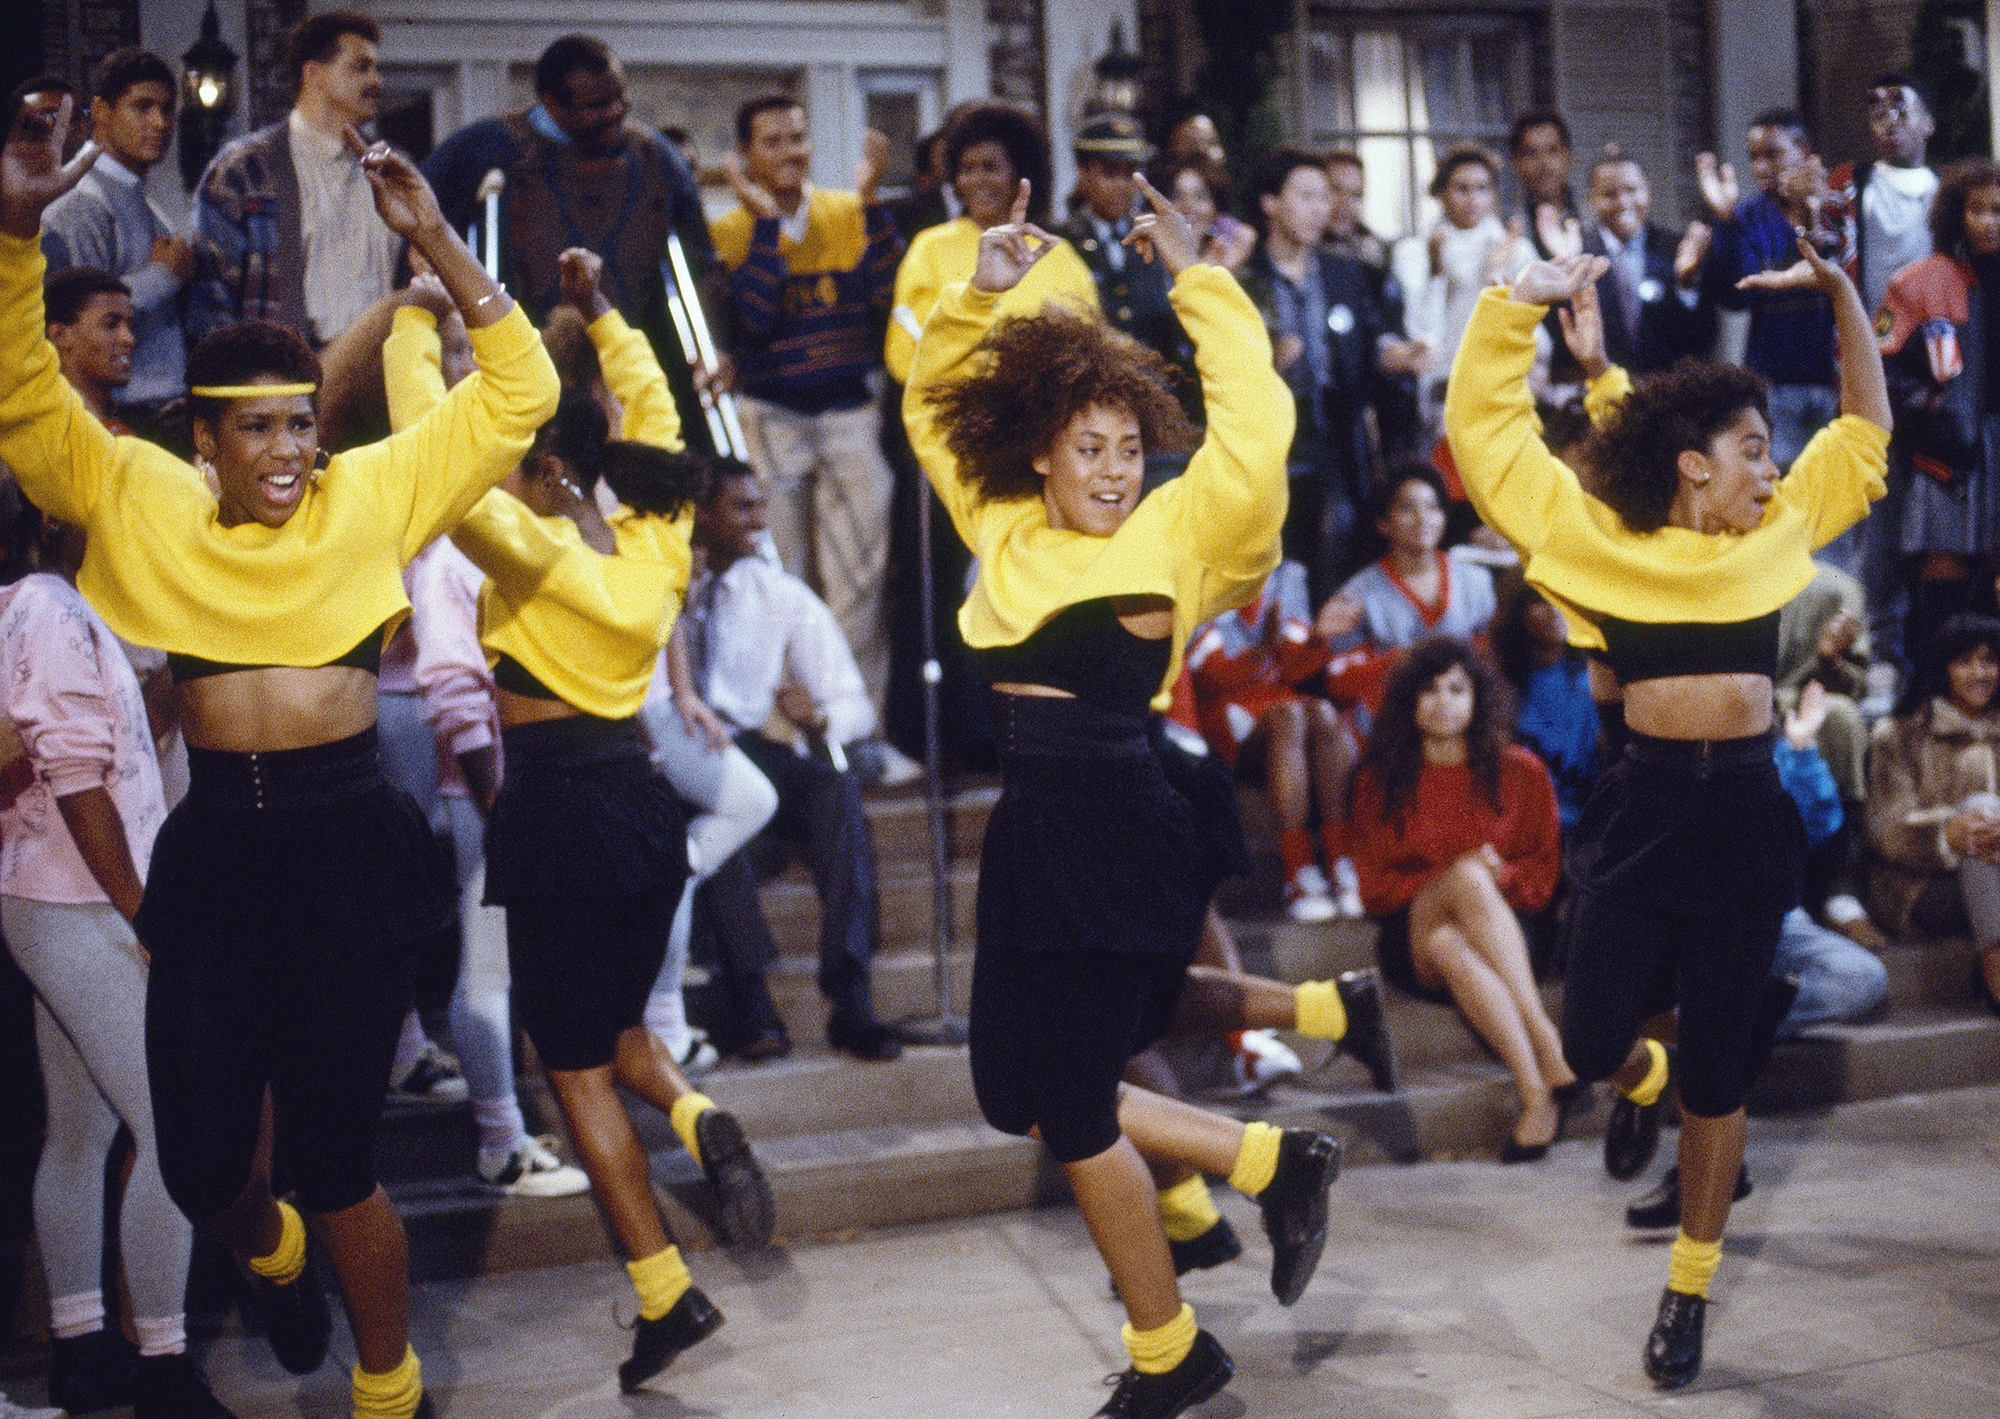 Picture from a 1988 episode of NBC's "A Different World." From left to right are Dawnn Lewis as Jaleesa Vinson Taylor, Cree Summer as Winifred "Freddie" Brooks and Jasmine Guy as Whitley Marion Gilbert Wayne. The three women are wearing yellow tops and black pants, and have their arms raised in the air as they dance at an event.